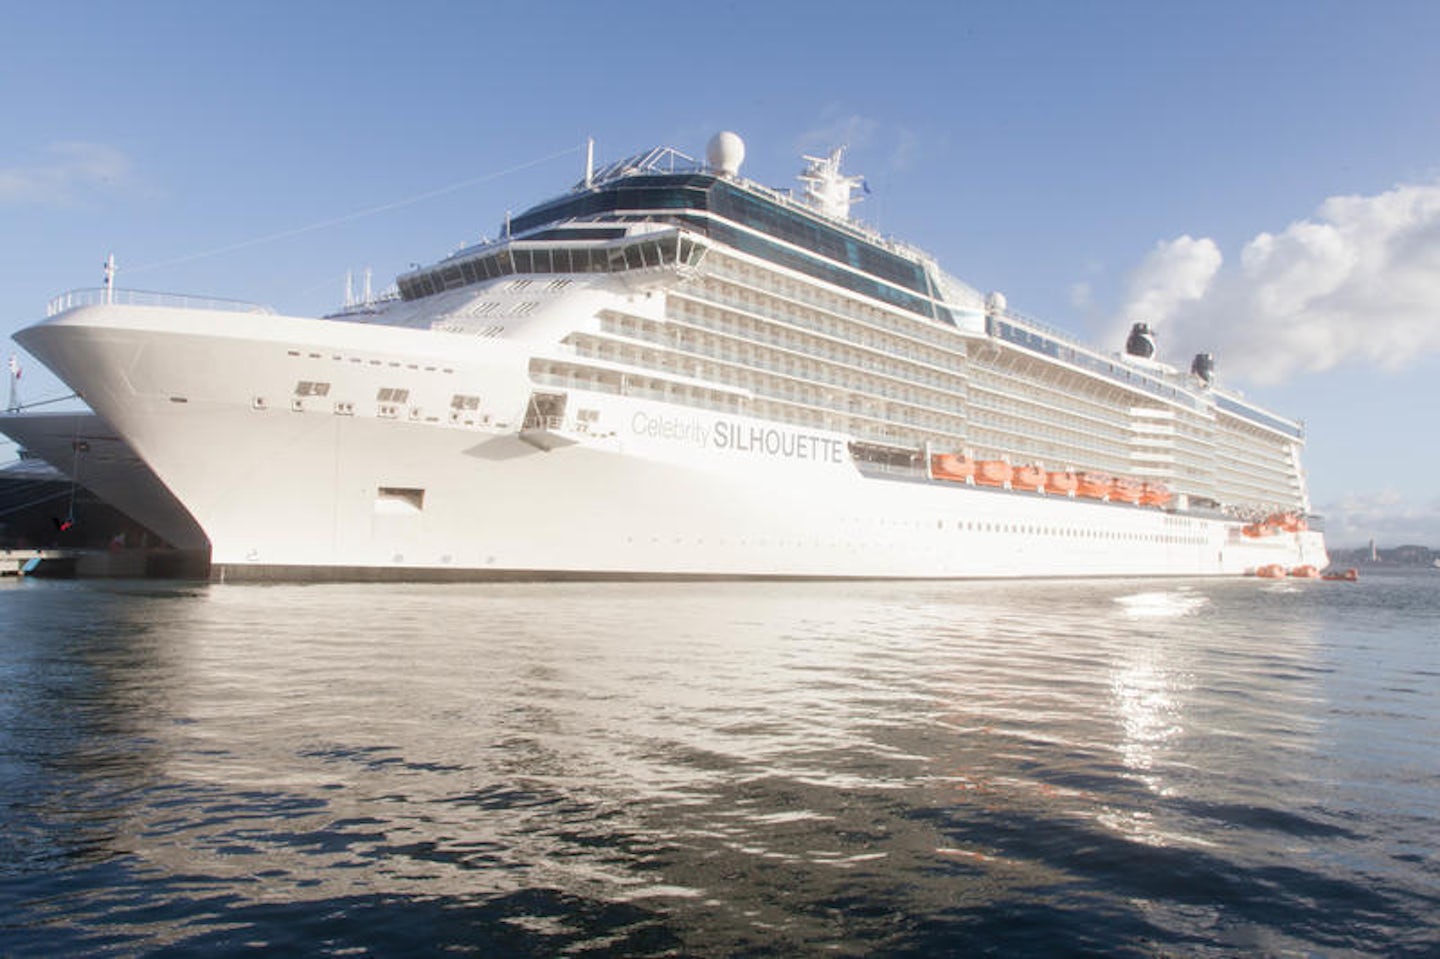 where is cruise ship celebrity silhouette now